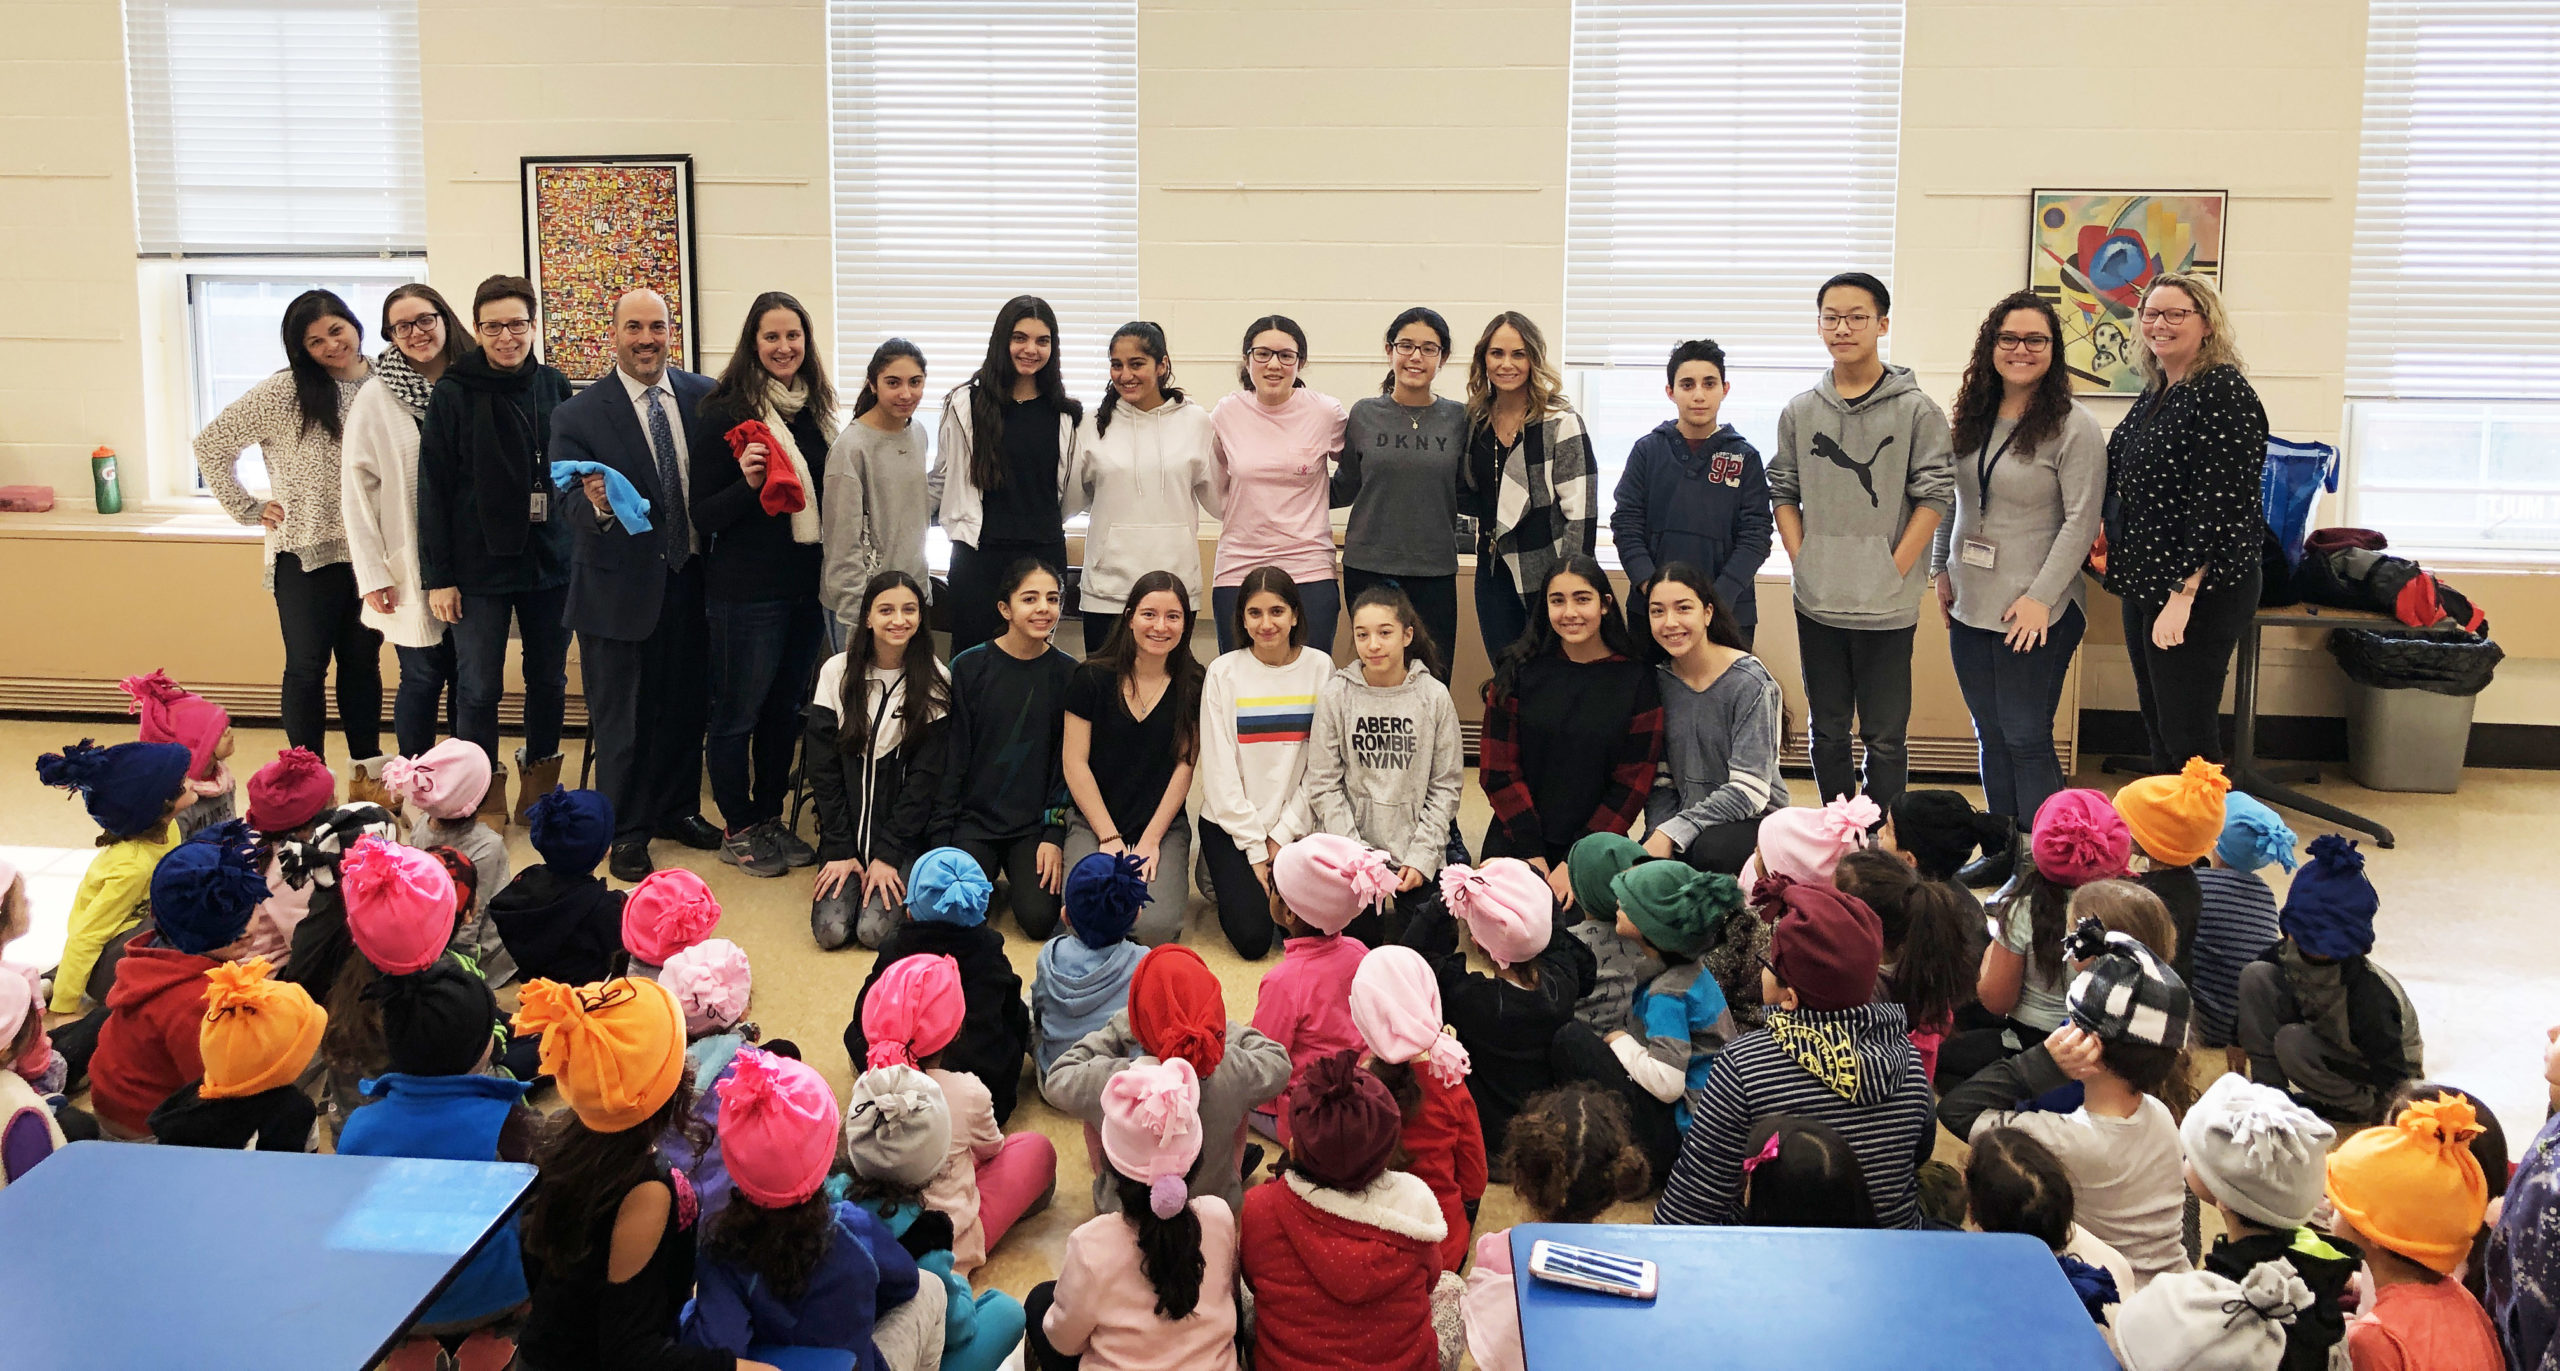 Eighth-graders from the North Middle School FACS program visited the John F. Kennedy School to deliver fleece hats and share a story with kindergarten students. Lauren Neckin, department chair for FACS, and her North Middle students are photographed with Kennedy School faculty Alyssa Gies, special education teacher; Christina Russo, kindergarten teaching assistant; Judy Friedman, kindergarten teacher; Ron Gimondo, principal; Michelle Reiter, kindergarten teacher; Gabby Kishinevsky, kindergarten teacher; and Michelle Bell, assistant principal. (Photo courtesy of the Great Neck Public Schools)